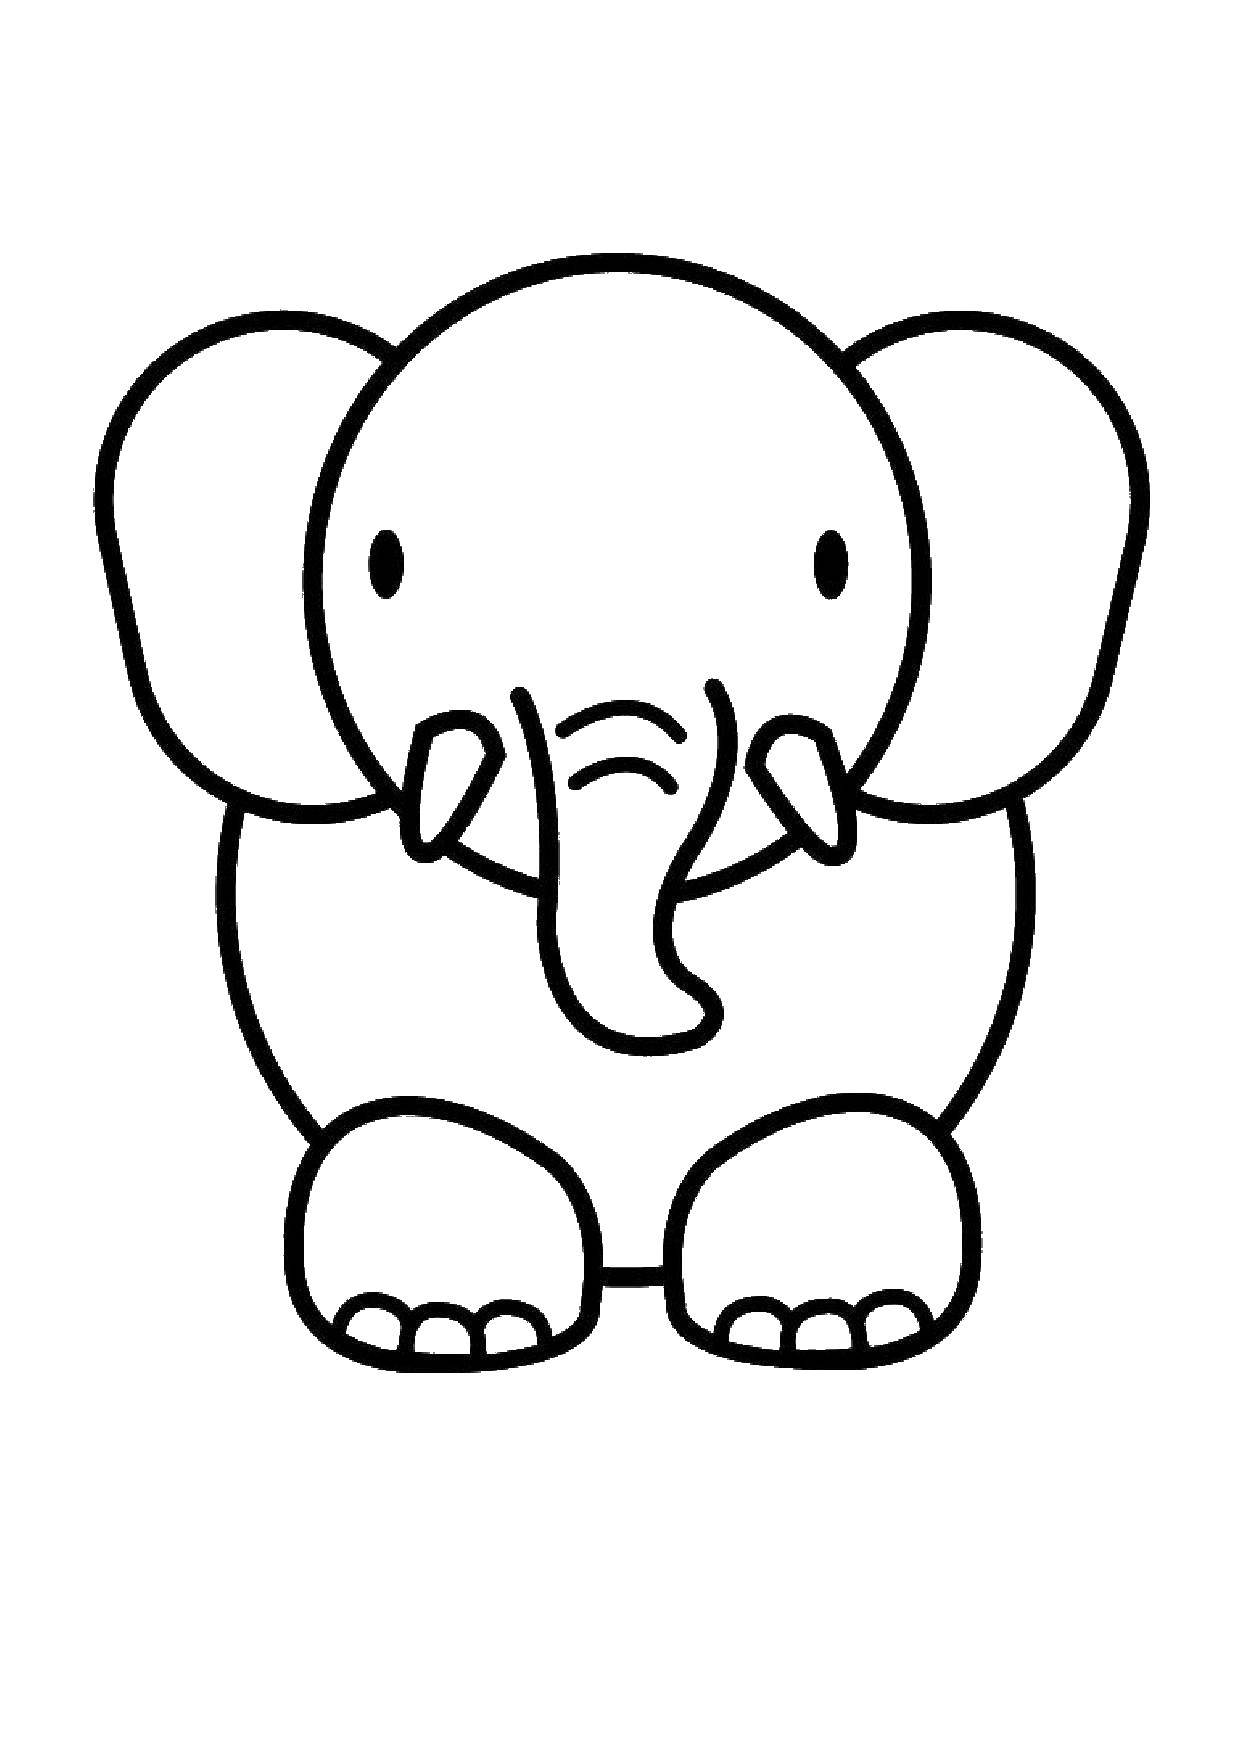 Coloring Elephant. Category Coloring pages for kids. Tags:  Animals, elephant.